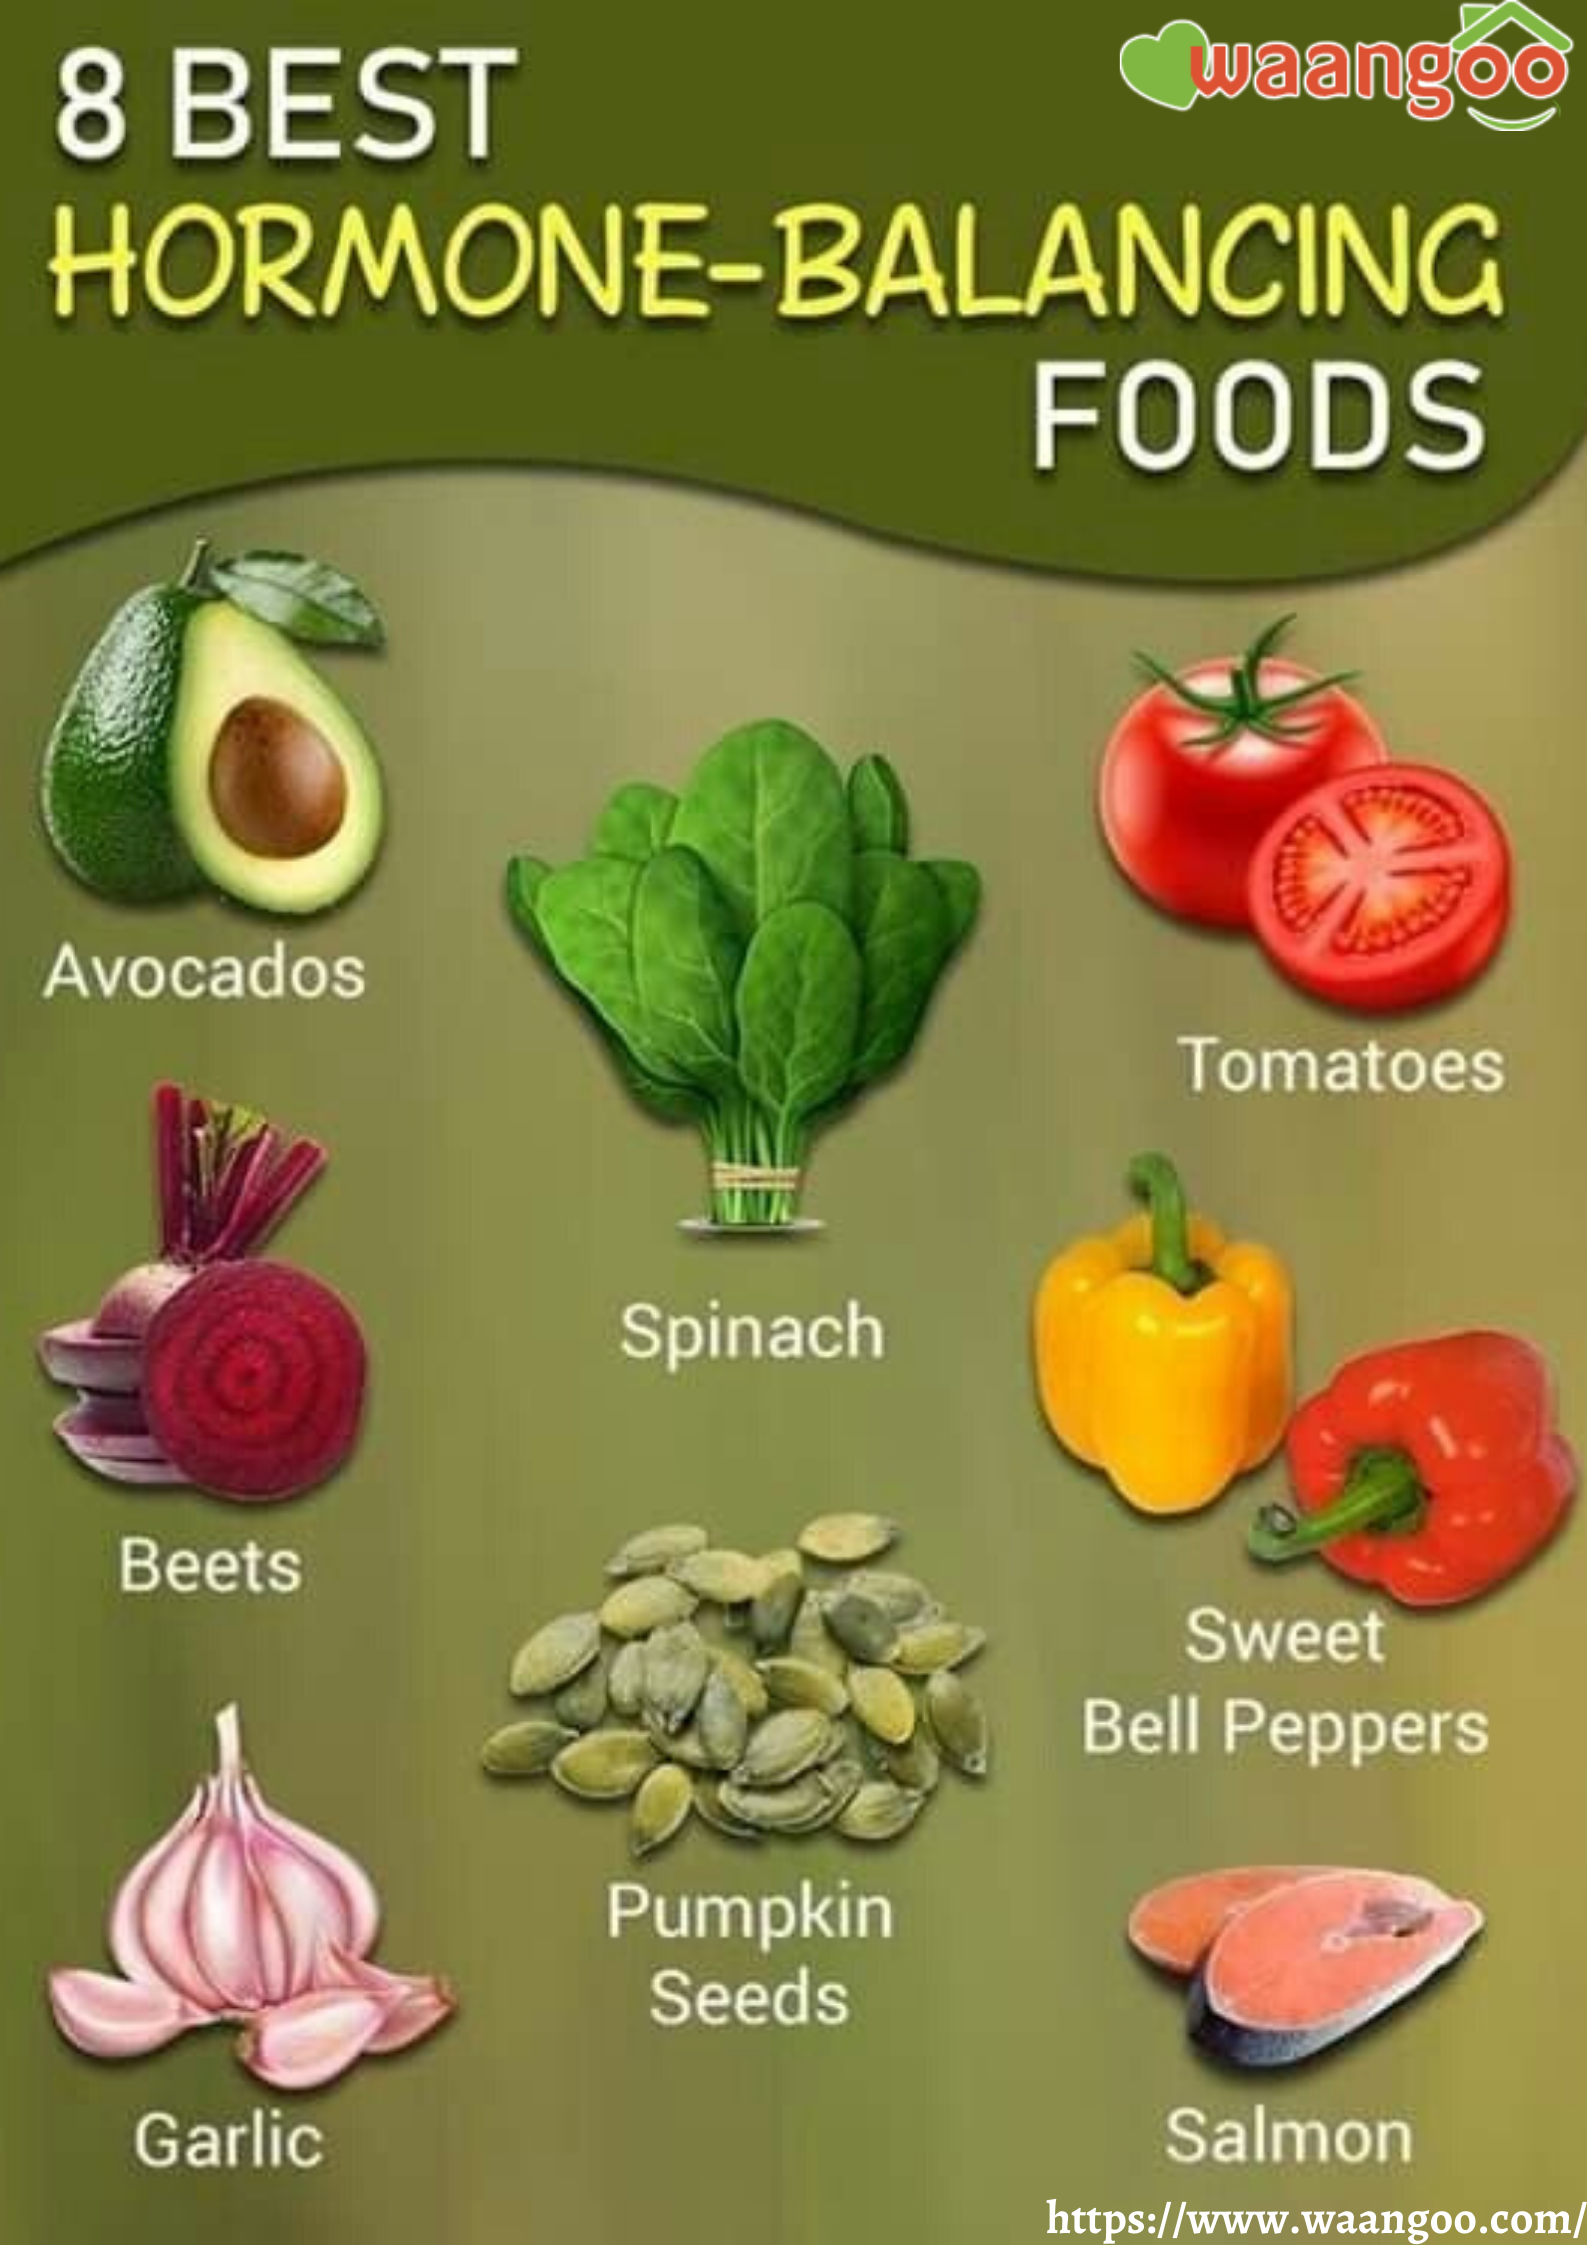 8 Foods That Can Help Balance Your Hormones Naturally ...